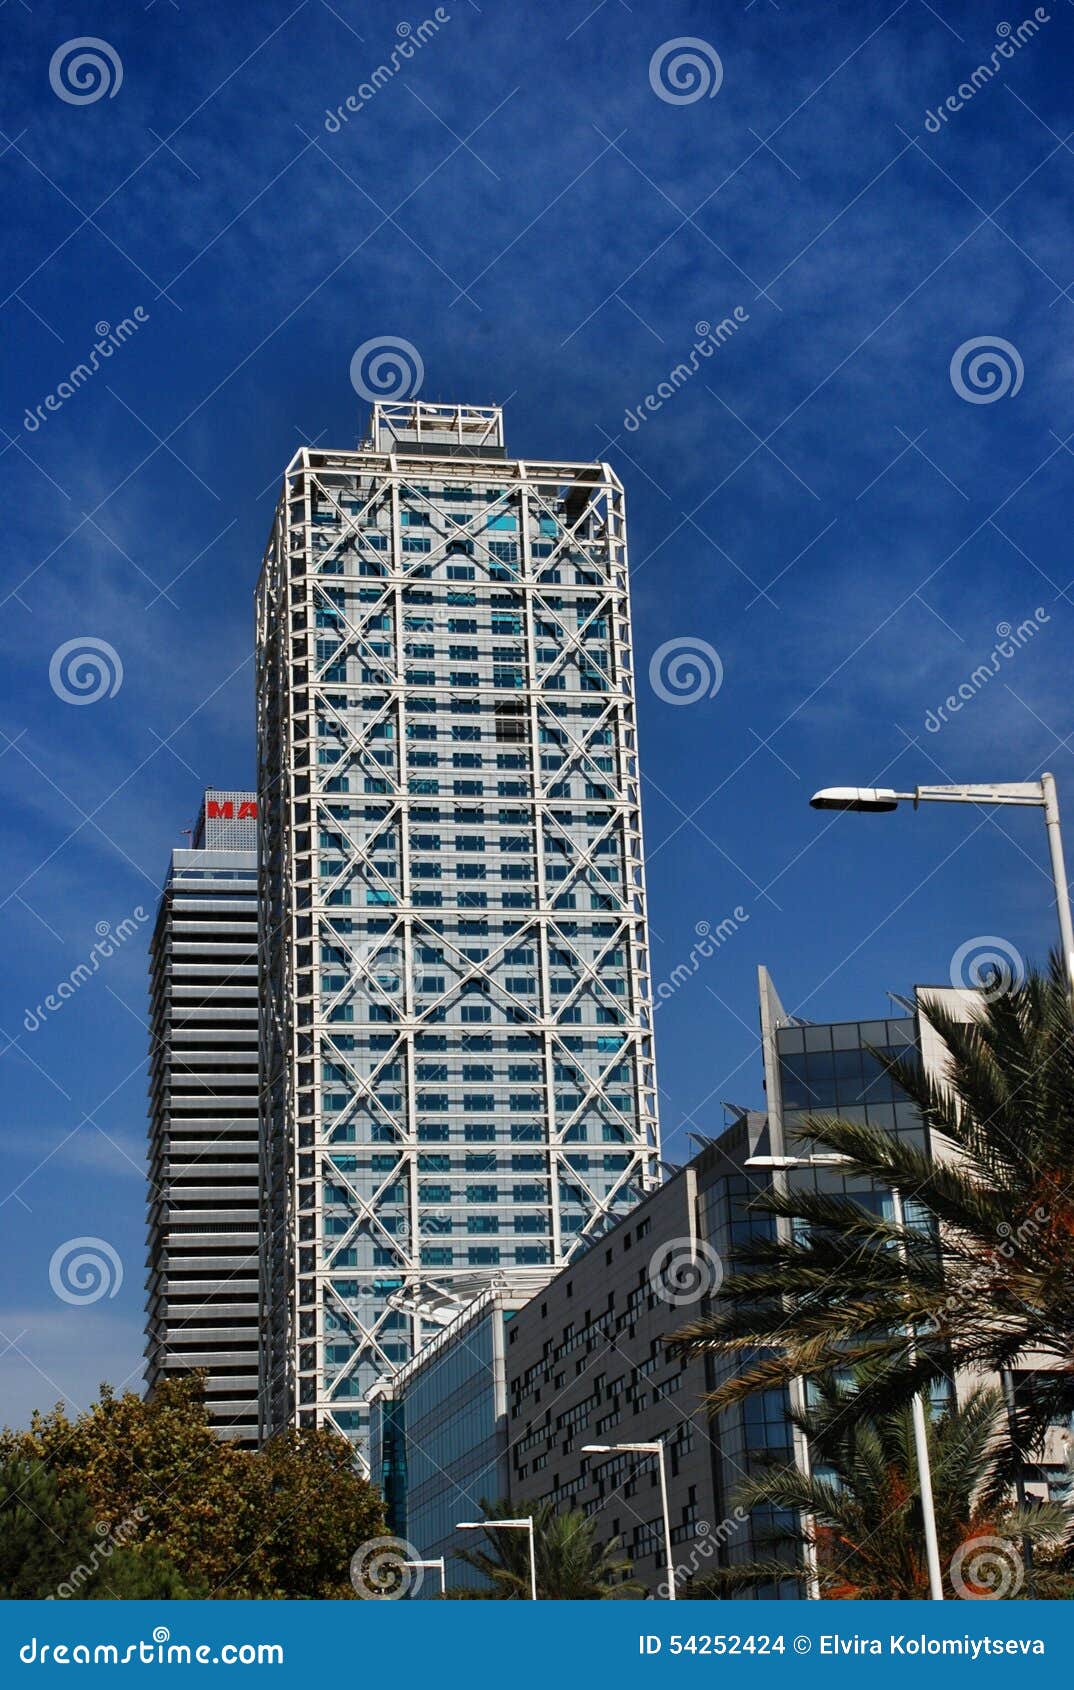 mapfre tower and hotel arts